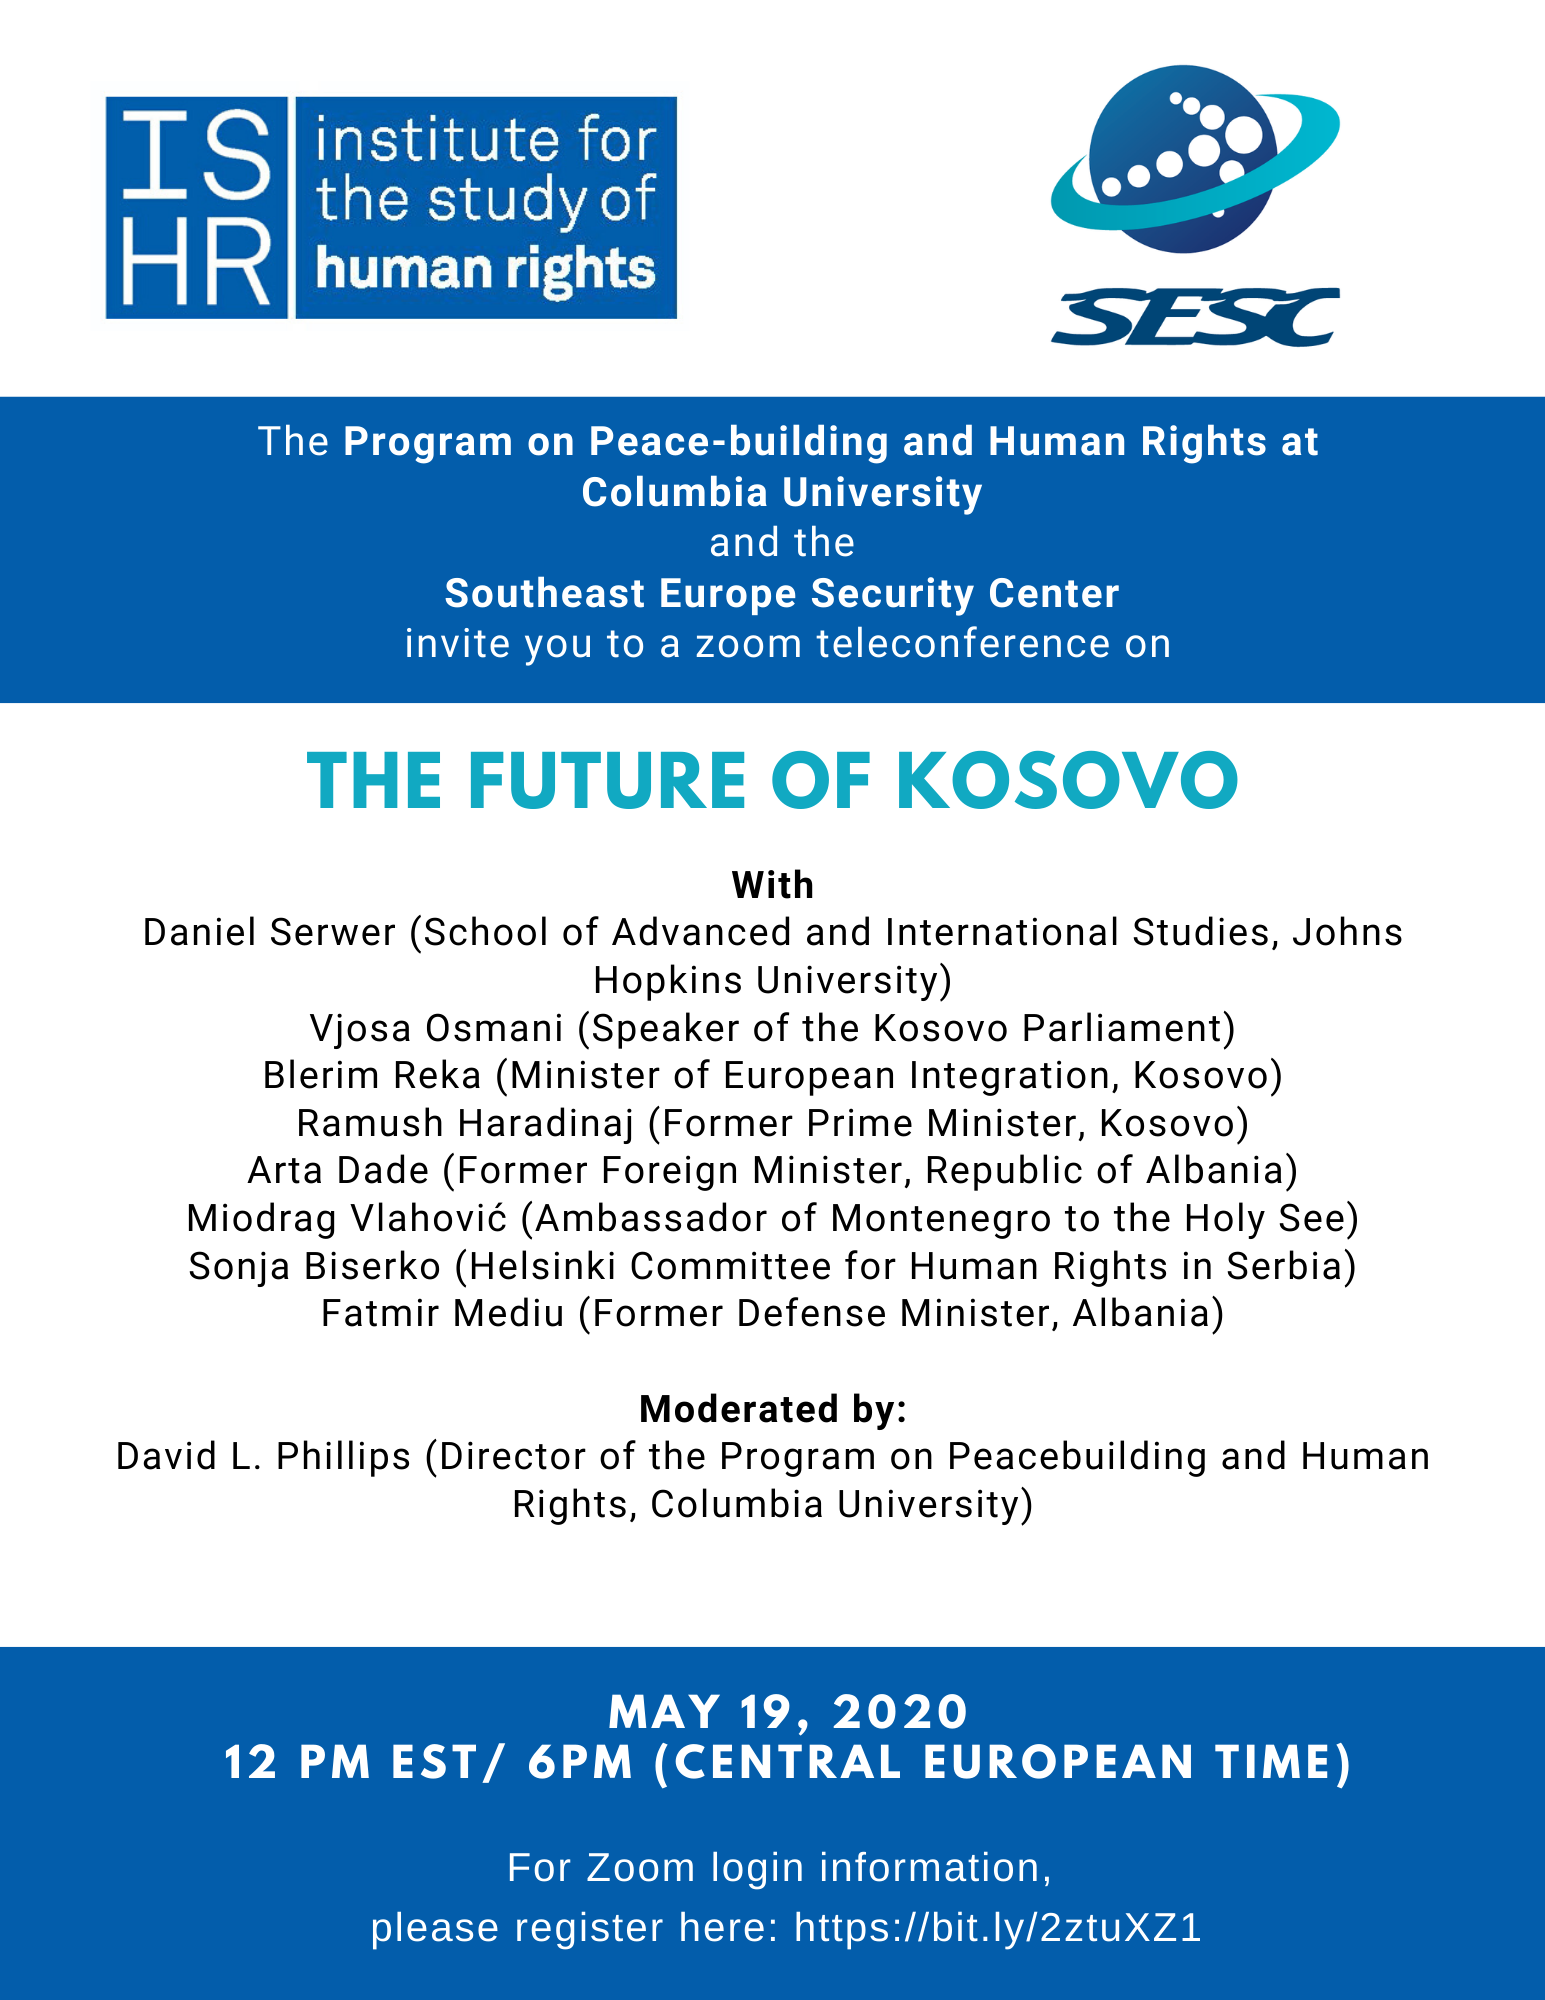 The Future of Institute for Study of Human Rights